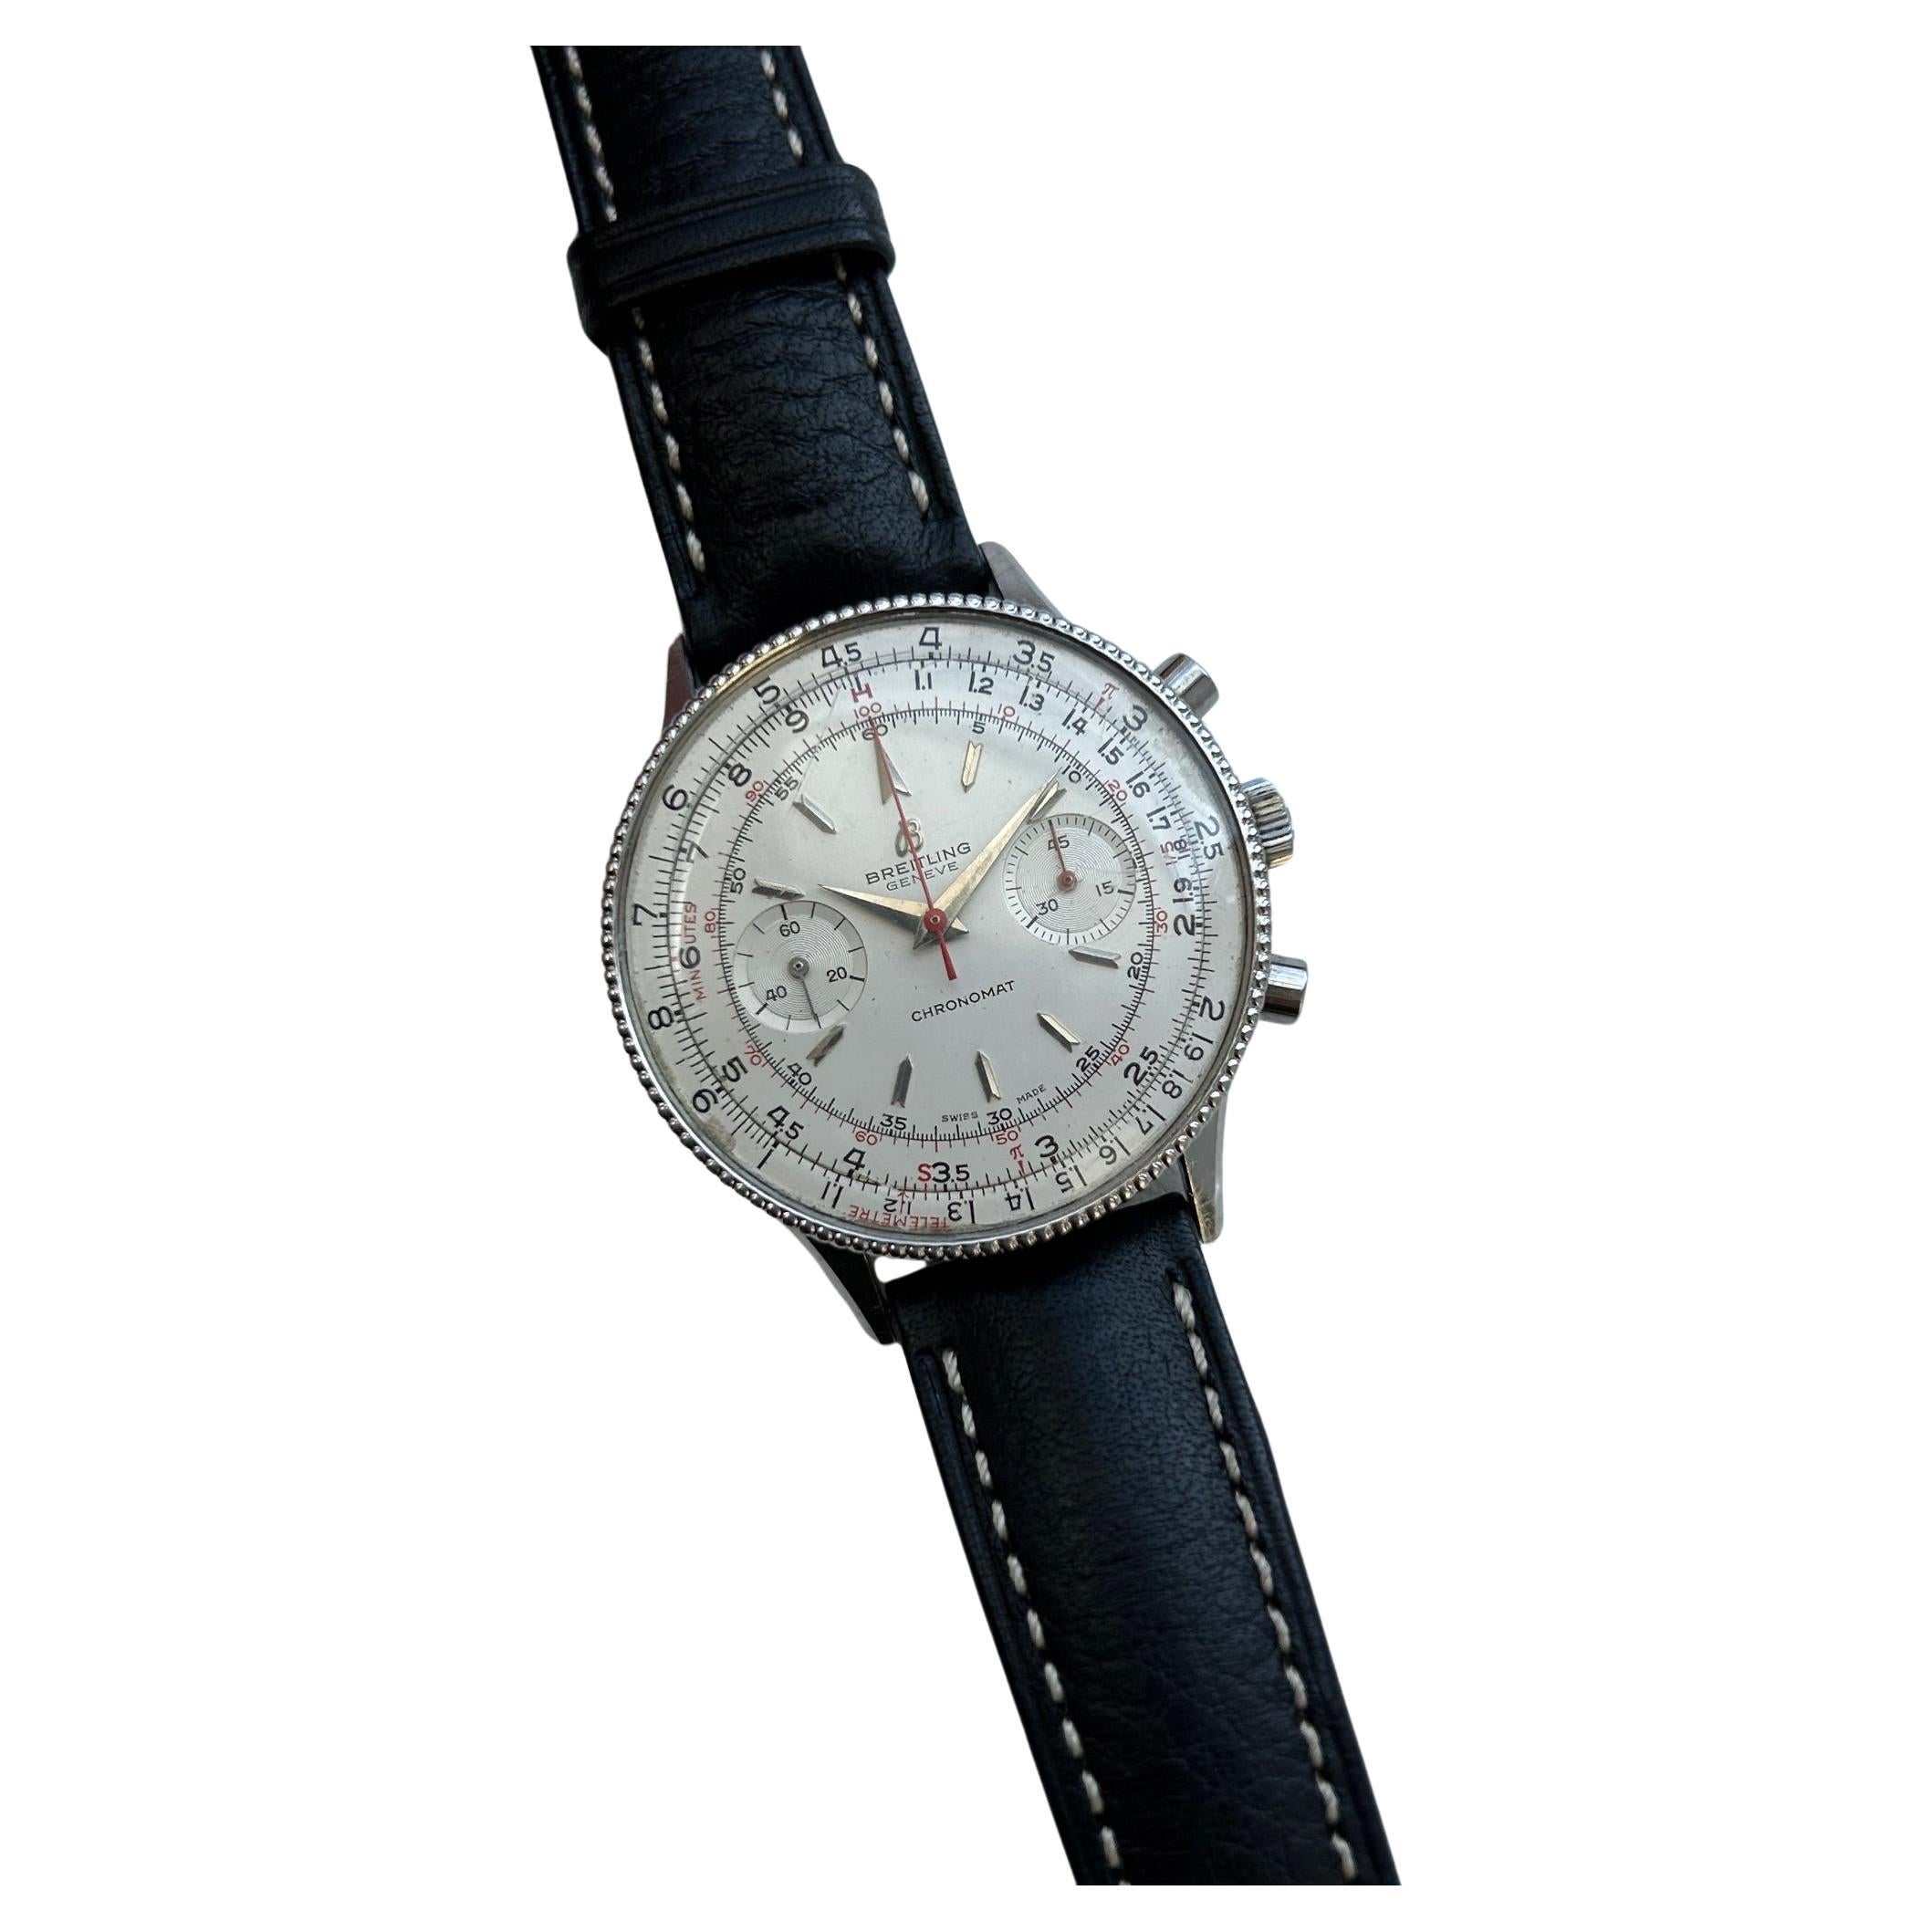 Breitling Chronomat ref 808 Wristwatch, 175 Manually Movement, Circa 1962. For Sale